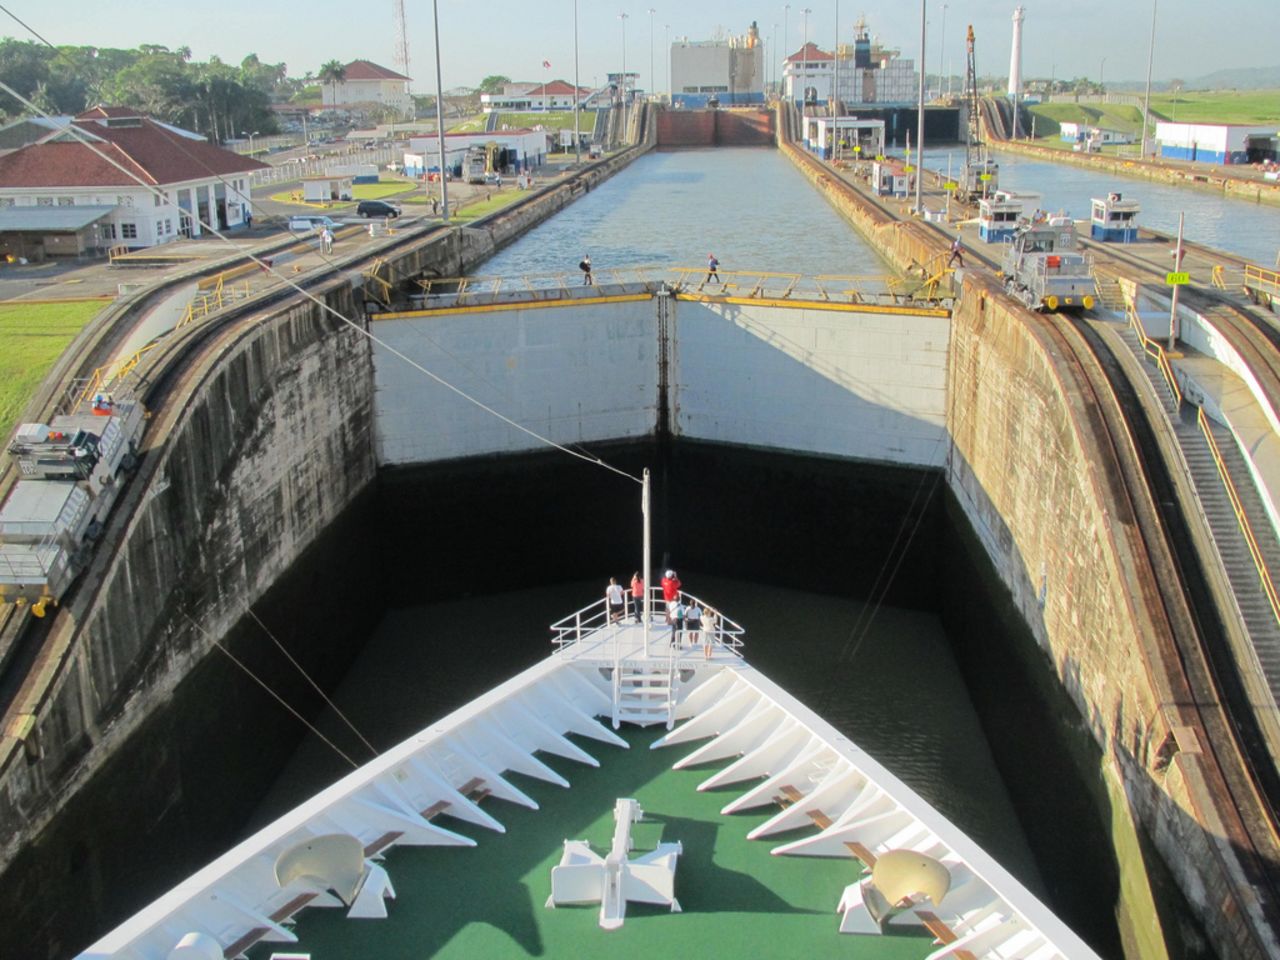 The series of locks on the Panama Canal are legendary -- ships are lifted 85 feet and put down again. You'll need a reservation to get through these doors.